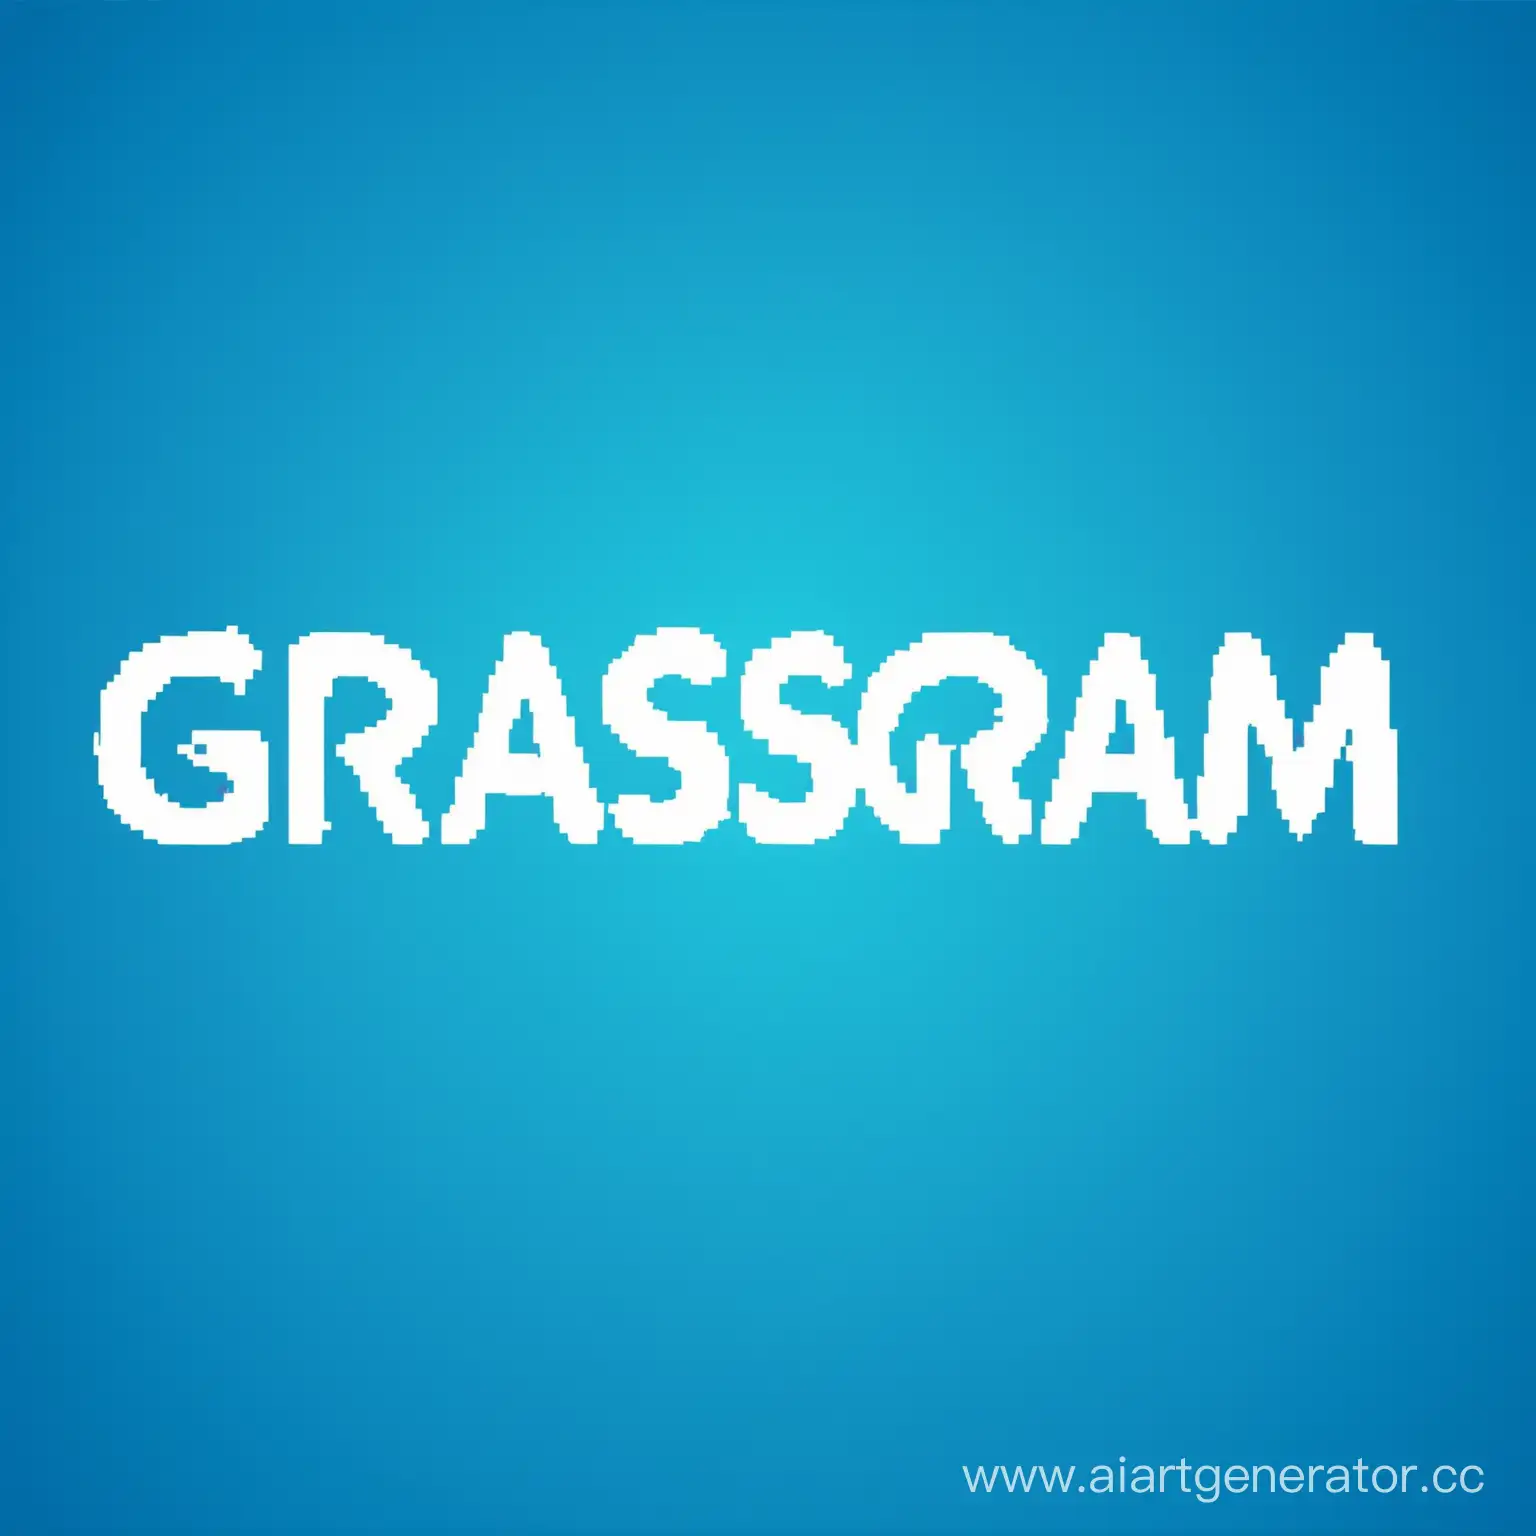 text "GrasGram", blue background, computer game style